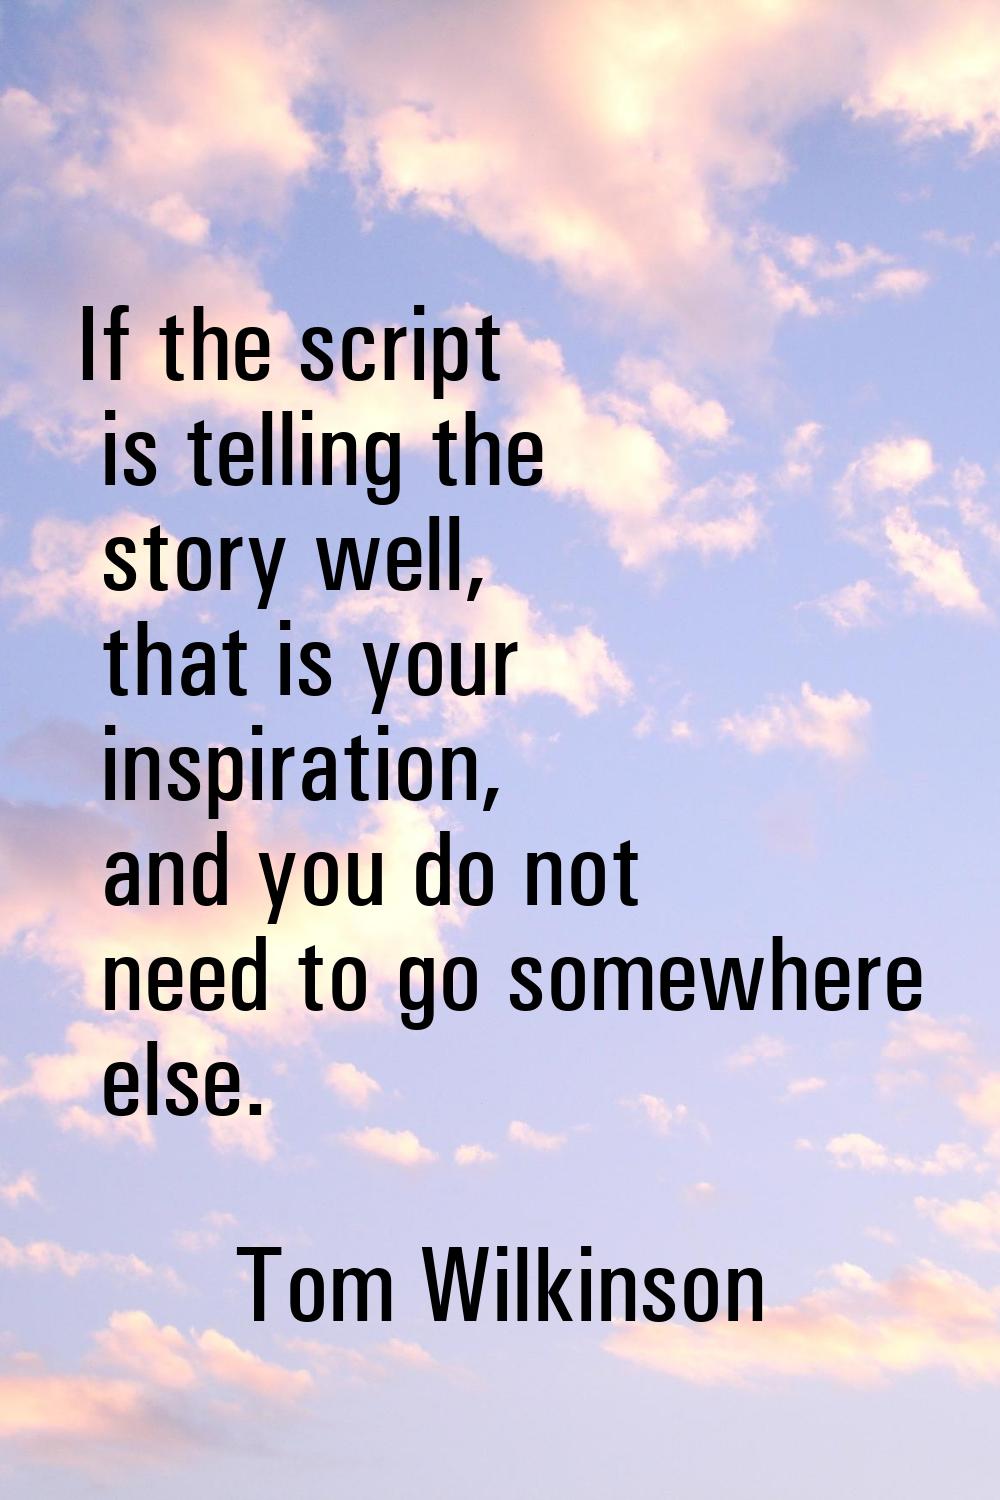 If the script is telling the story well, that is your inspiration, and you do not need to go somewh